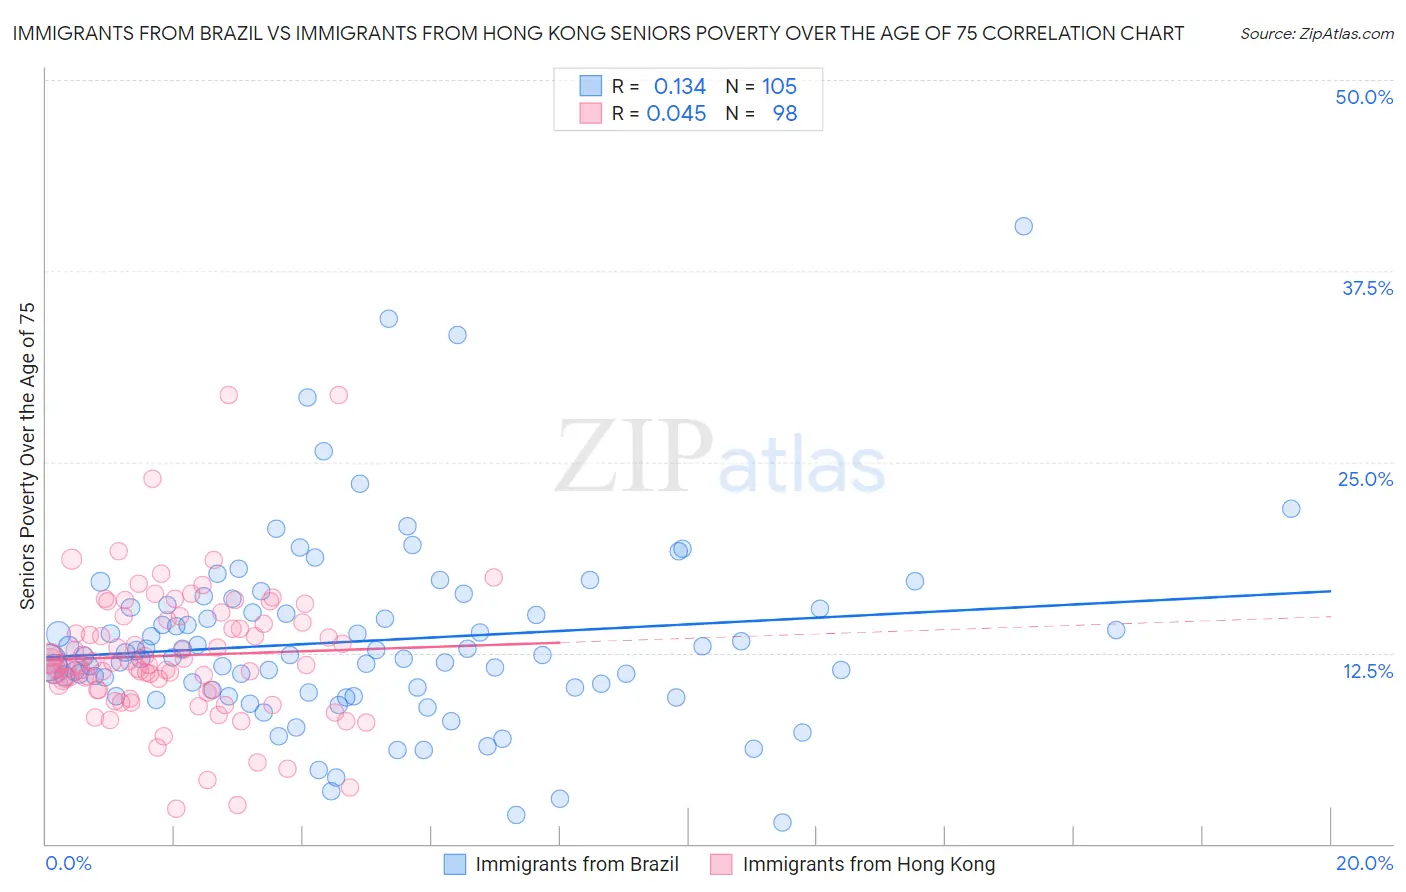 Immigrants from Brazil vs Immigrants from Hong Kong Seniors Poverty Over the Age of 75